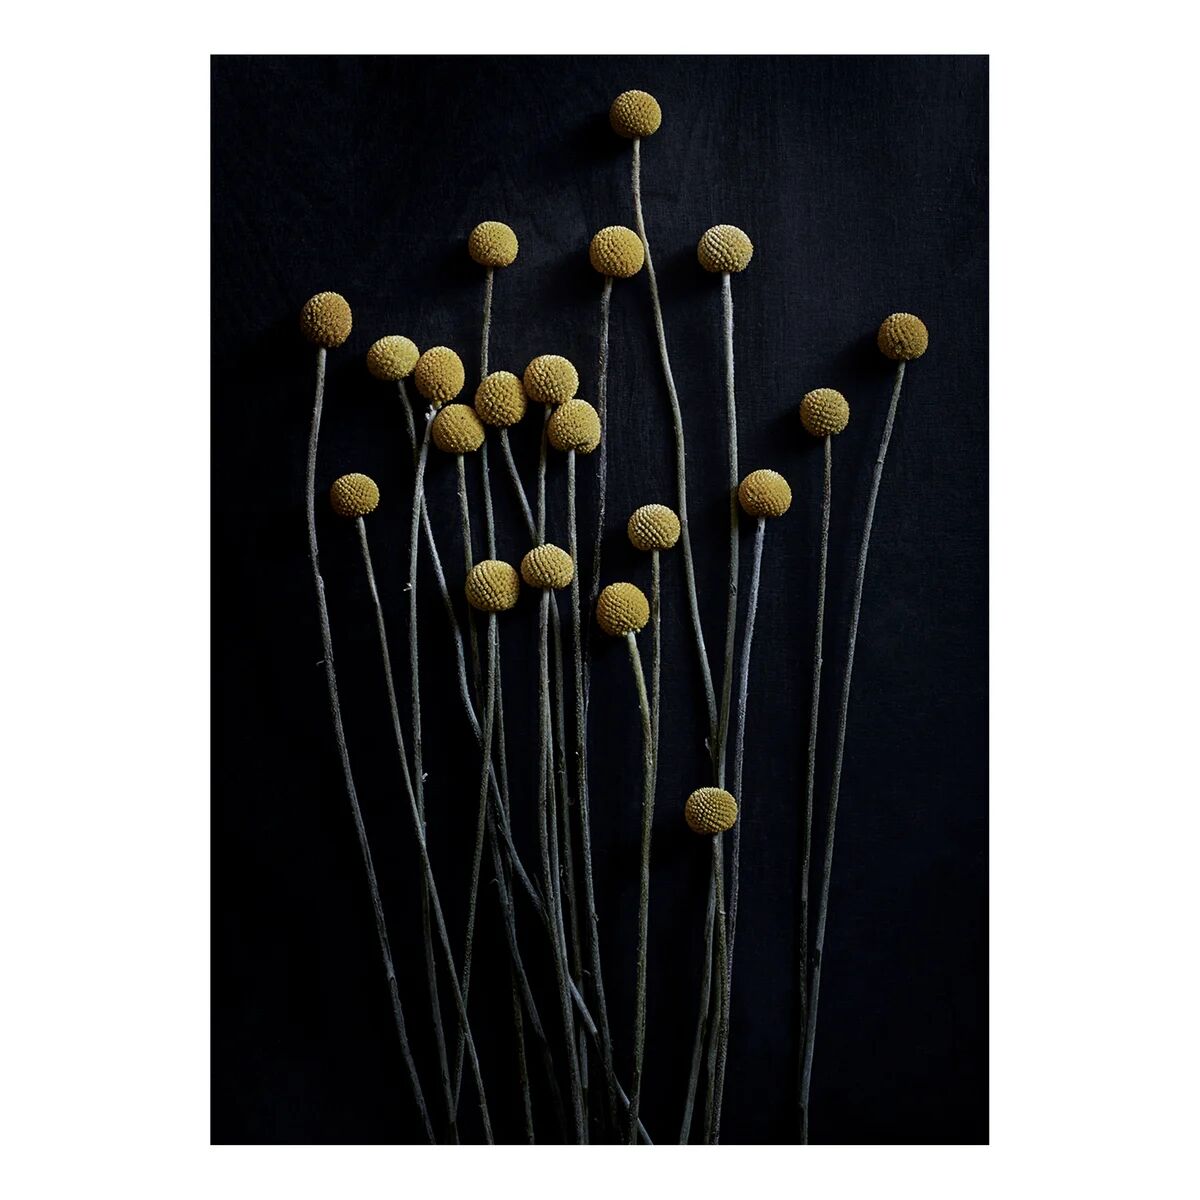 Paper Collective Stil Life 01 Yellow Drumsticks poster 50x70 cm